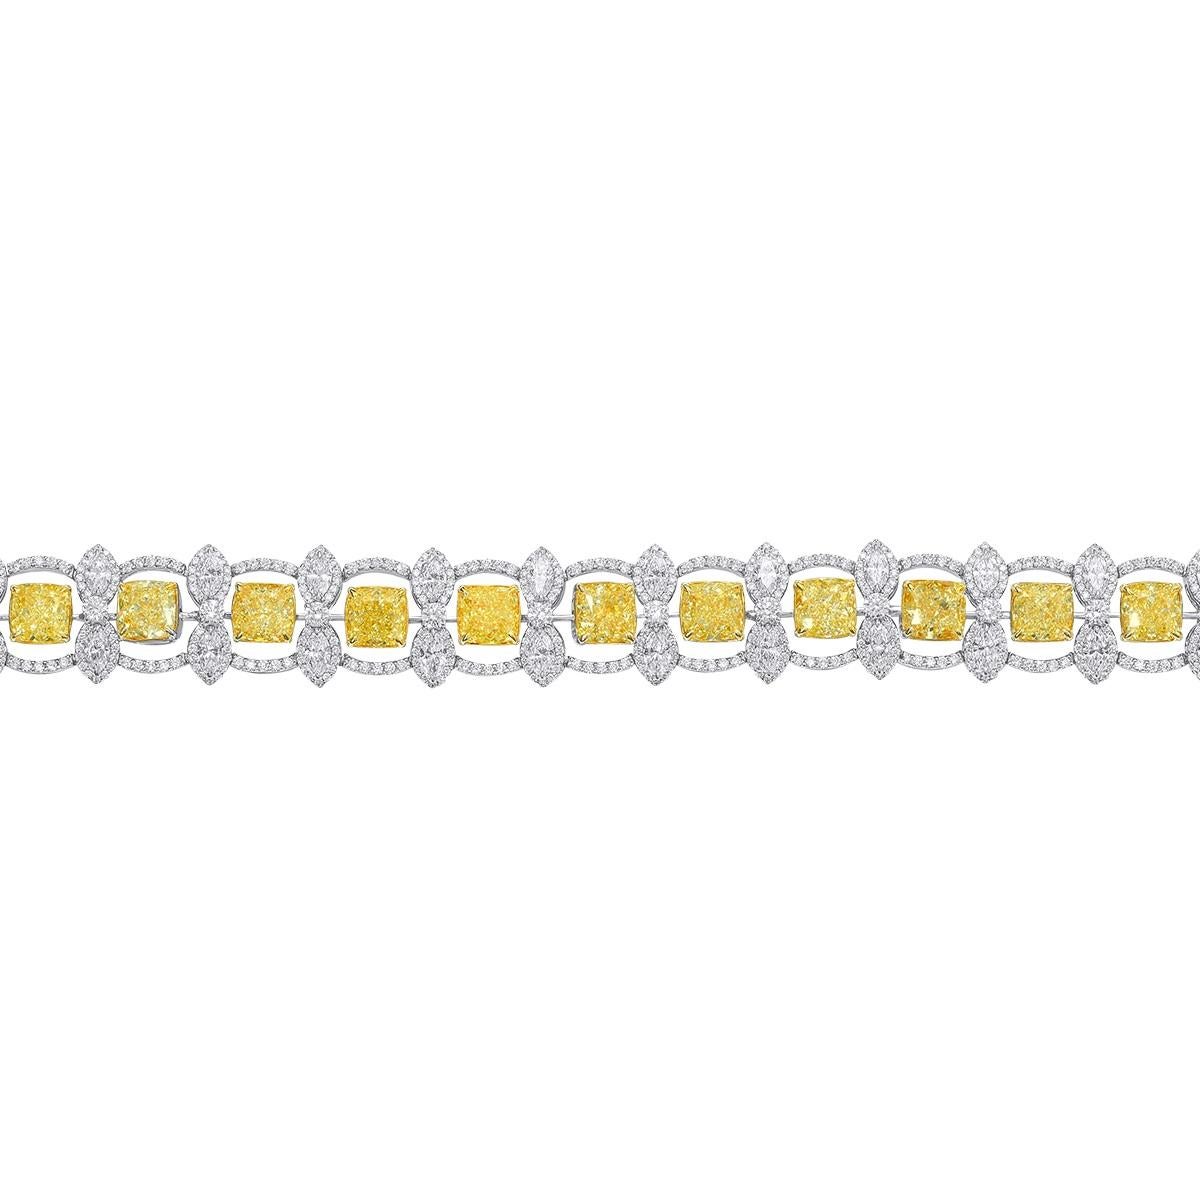 Celebrate special occasion in your life with this gorgeous 1ct each tennis bracelet. This elegant bracelet is handcrafted to a standard of perfection with matching 1ct each yellow diamonds floating with petals of white marquise diamond surrounding